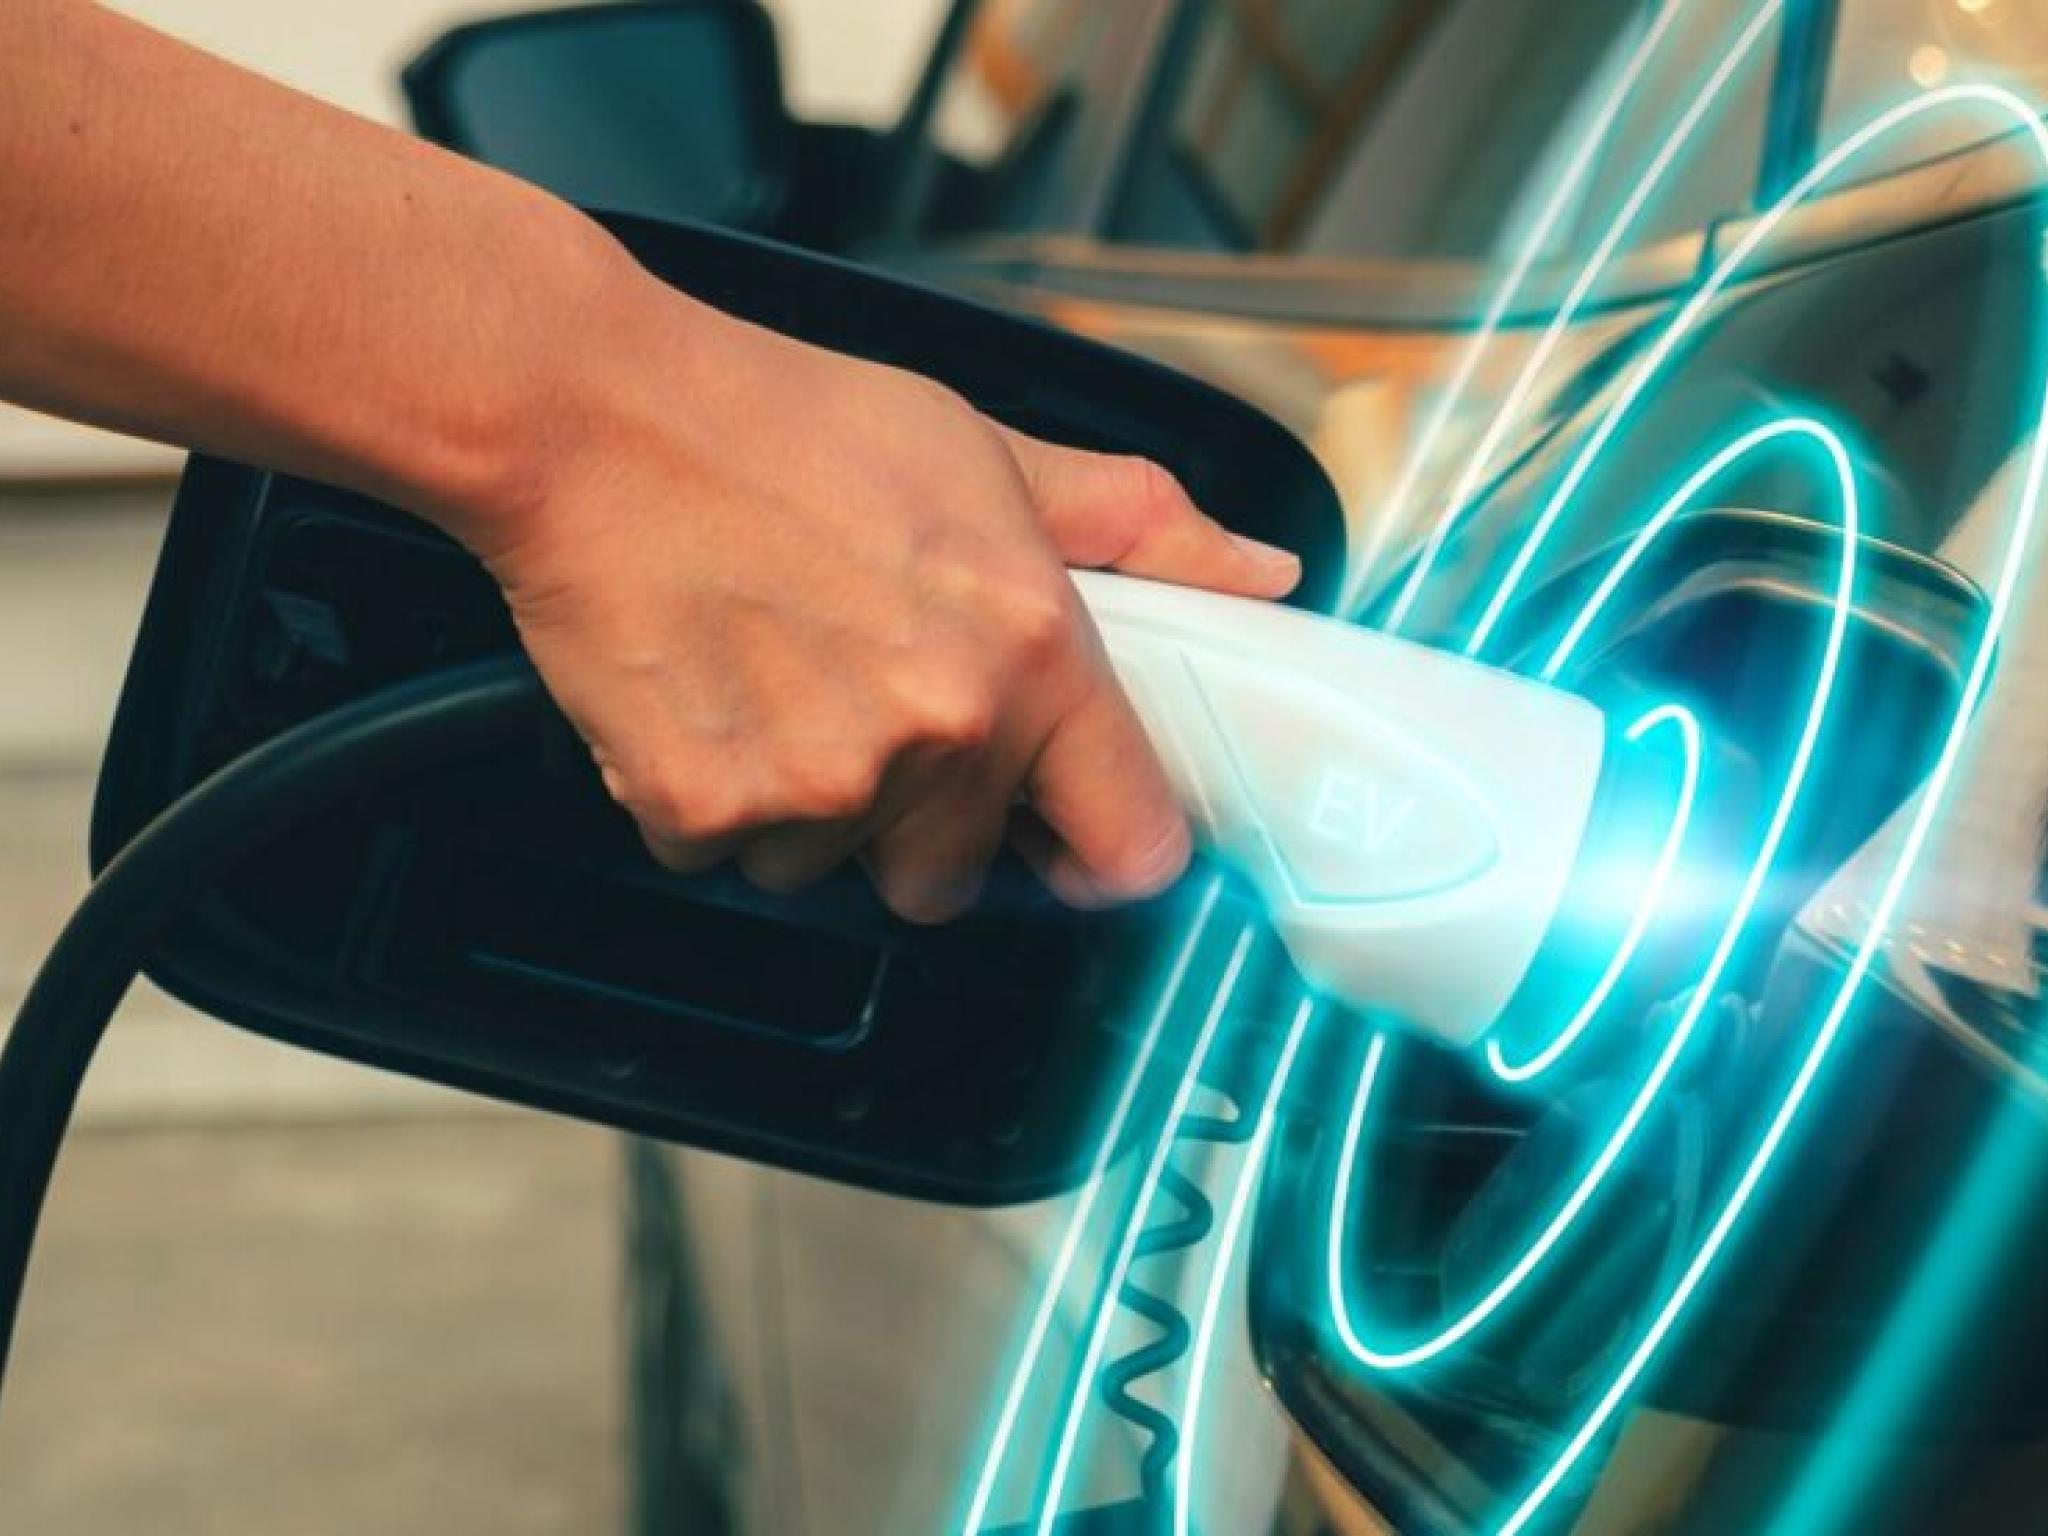  will-electric-vehicles-reach-50-market-share-in-us-by-2030-new-data-says-yes 